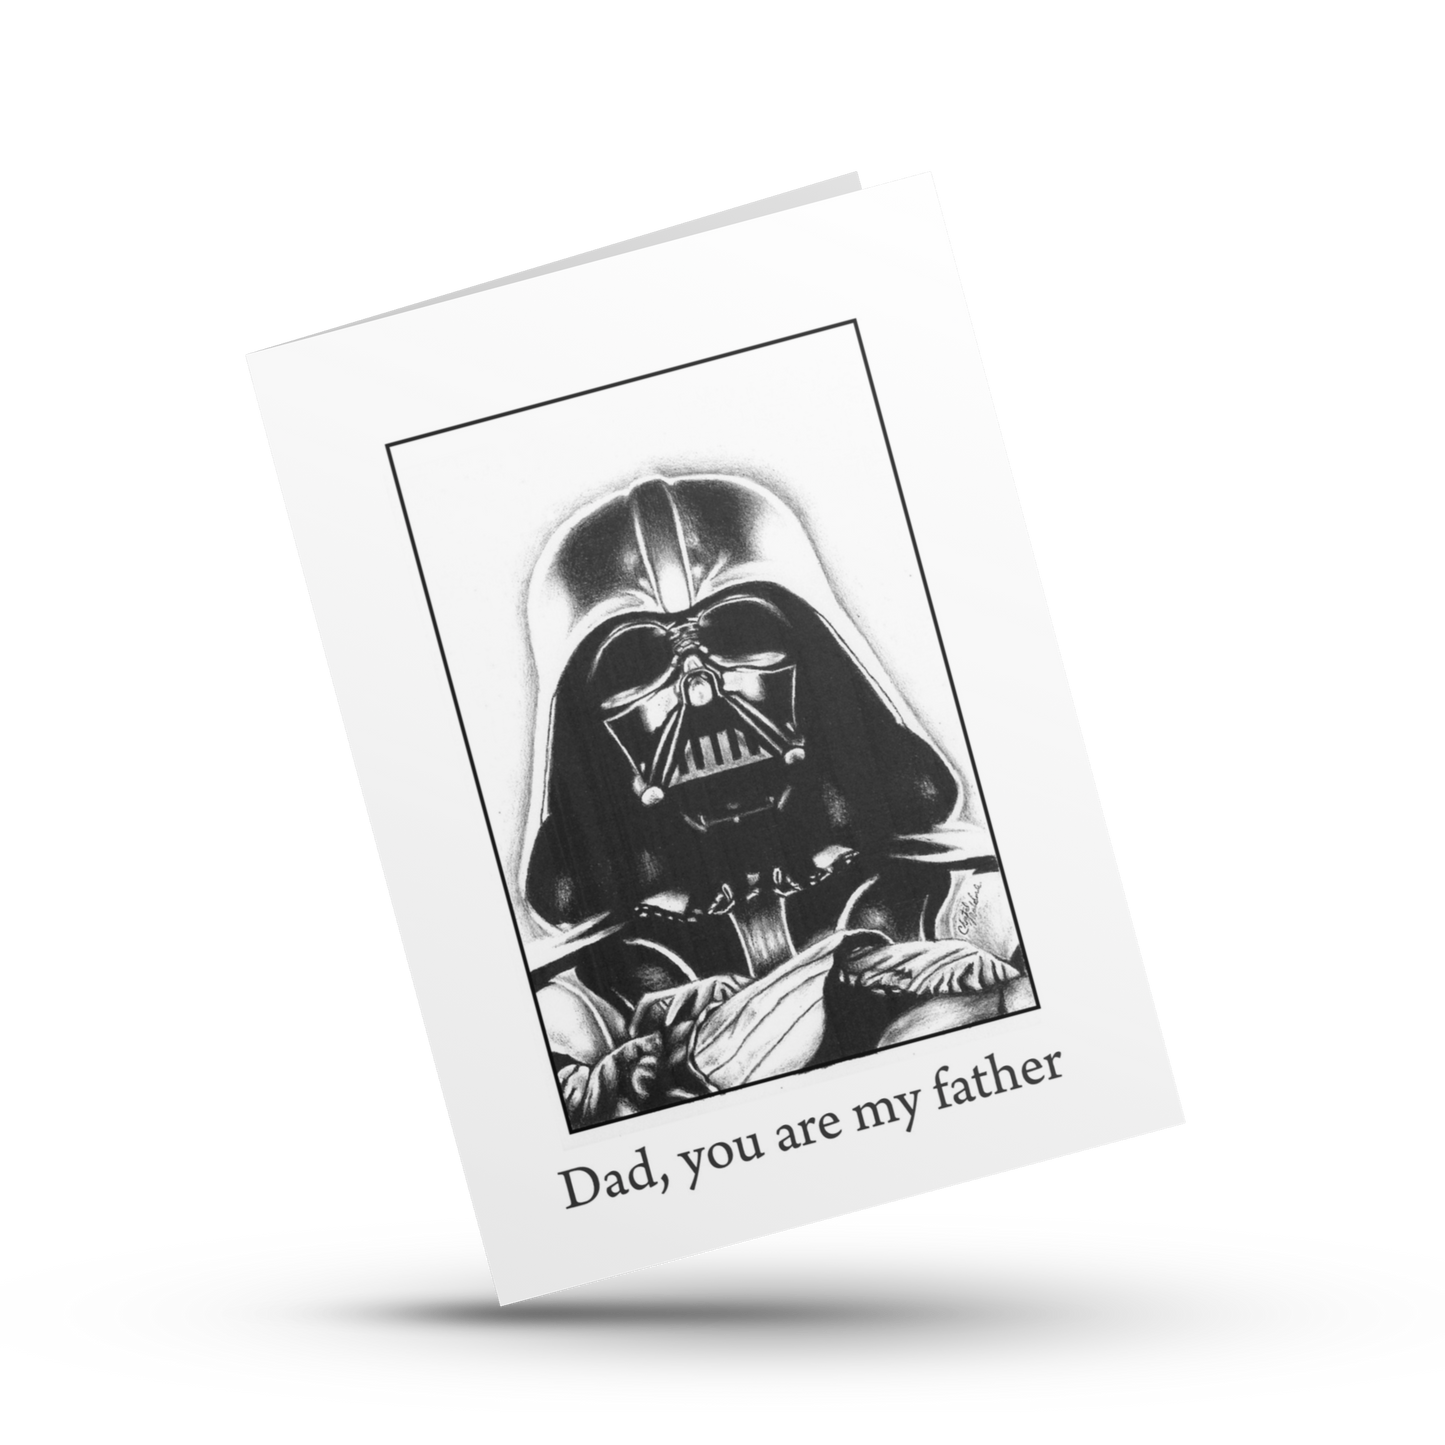 Dad you are my father, The dark side card, Father's day card, Funny fathers day card, Nerd card, The force card for dad, Movie theme card